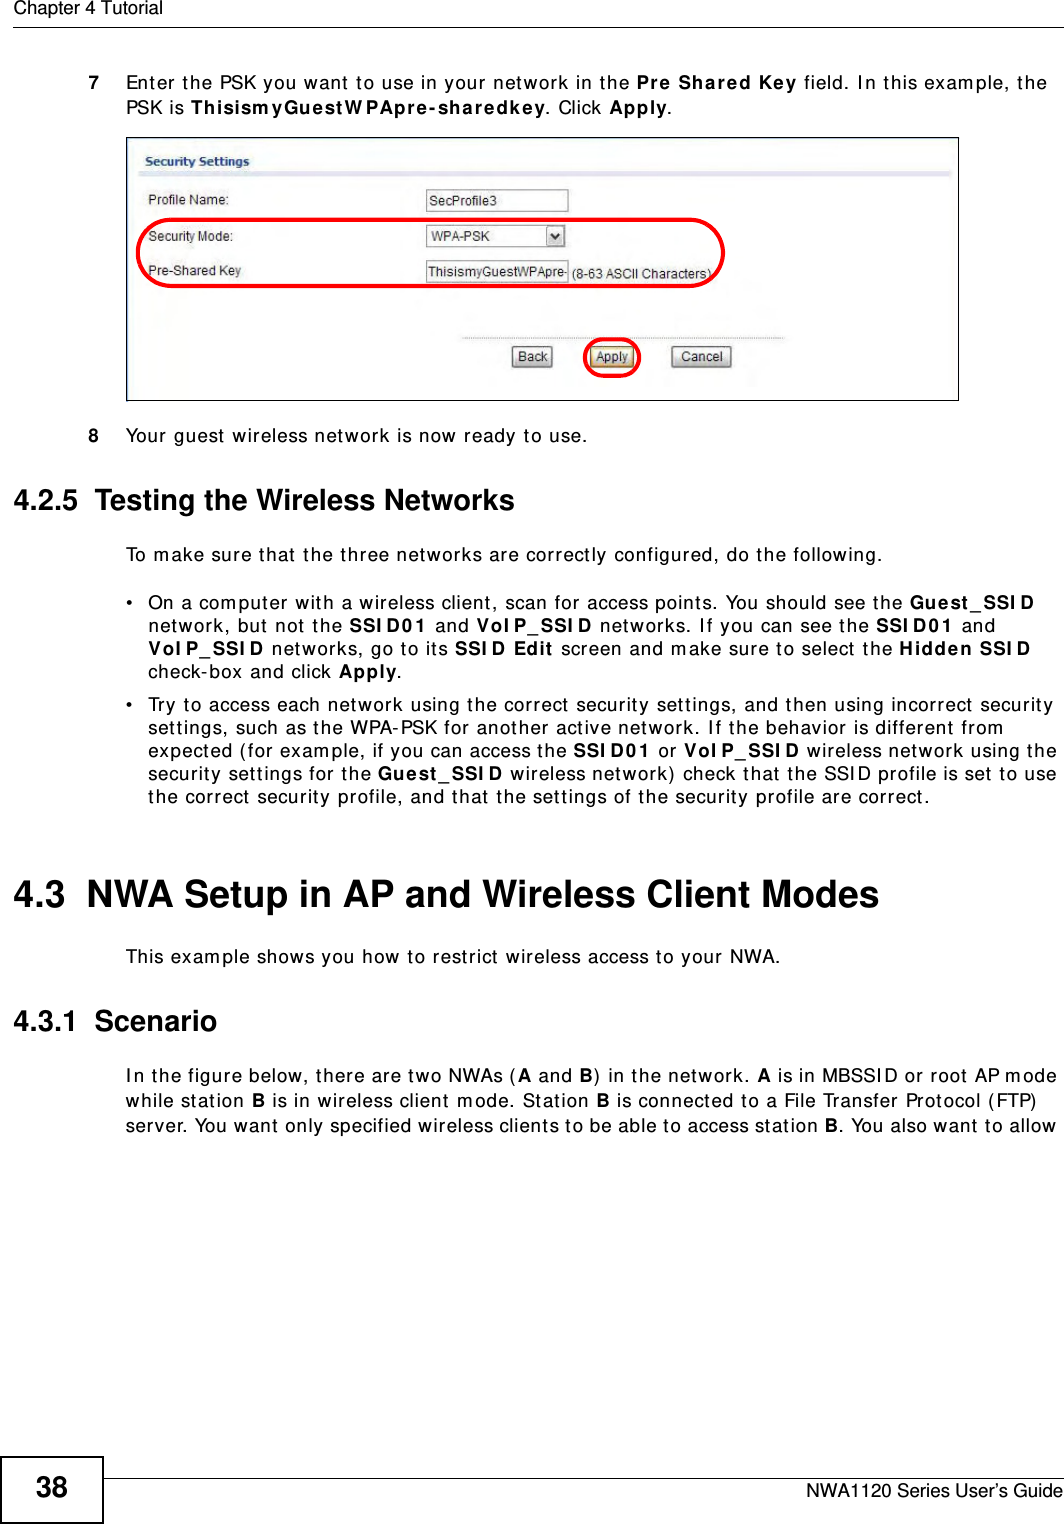 Chapter 4 TutorialNWA1120 Series User’s Guide387Enter the PSK you want to use in your network in the Pre Shared Key field. In this example, the PSK is ThisismyGuestWPApre-sharedkey. Click Apply. 8Your guest wireless network is now ready to use.4.2.5  Testing the Wireless NetworksTo make sure that the three networks are correctly configured, do the following.• On a computer with a wireless client, scan for access points. You should see the Guest_SSID network, but not the SSID01 and VoIP_SSID networks. If you can see the SSID01 and VoIP_SSID networks, go to its SSID Edit screen and make sure to select the Hidden SSID check-box and click Apply.• Try to access each network using the correct security settings, and then using incorrect security settings, such as the WPA-PSK for another active network. If the behavior is different from expected (for example, if you can access the SSID01 or VoIP_SSID wireless network using the security settings for the Guest_SSID wireless network) check that the SSID profile is set to use the correct security profile, and that the settings of the security profile are correct.4.3  NWA Setup in AP and Wireless Client ModesThis example shows you how to restrict wireless access to your NWA.4.3.1  ScenarioIn the figure below, there are two NWAs (A and B) in the network. A is in MBSSID or root AP mode while station B is in wireless client mode. Station B is connected to a File Transfer Protocol (FTP) server. You want only specified wireless clients to be able to access station B. You also want to allow 